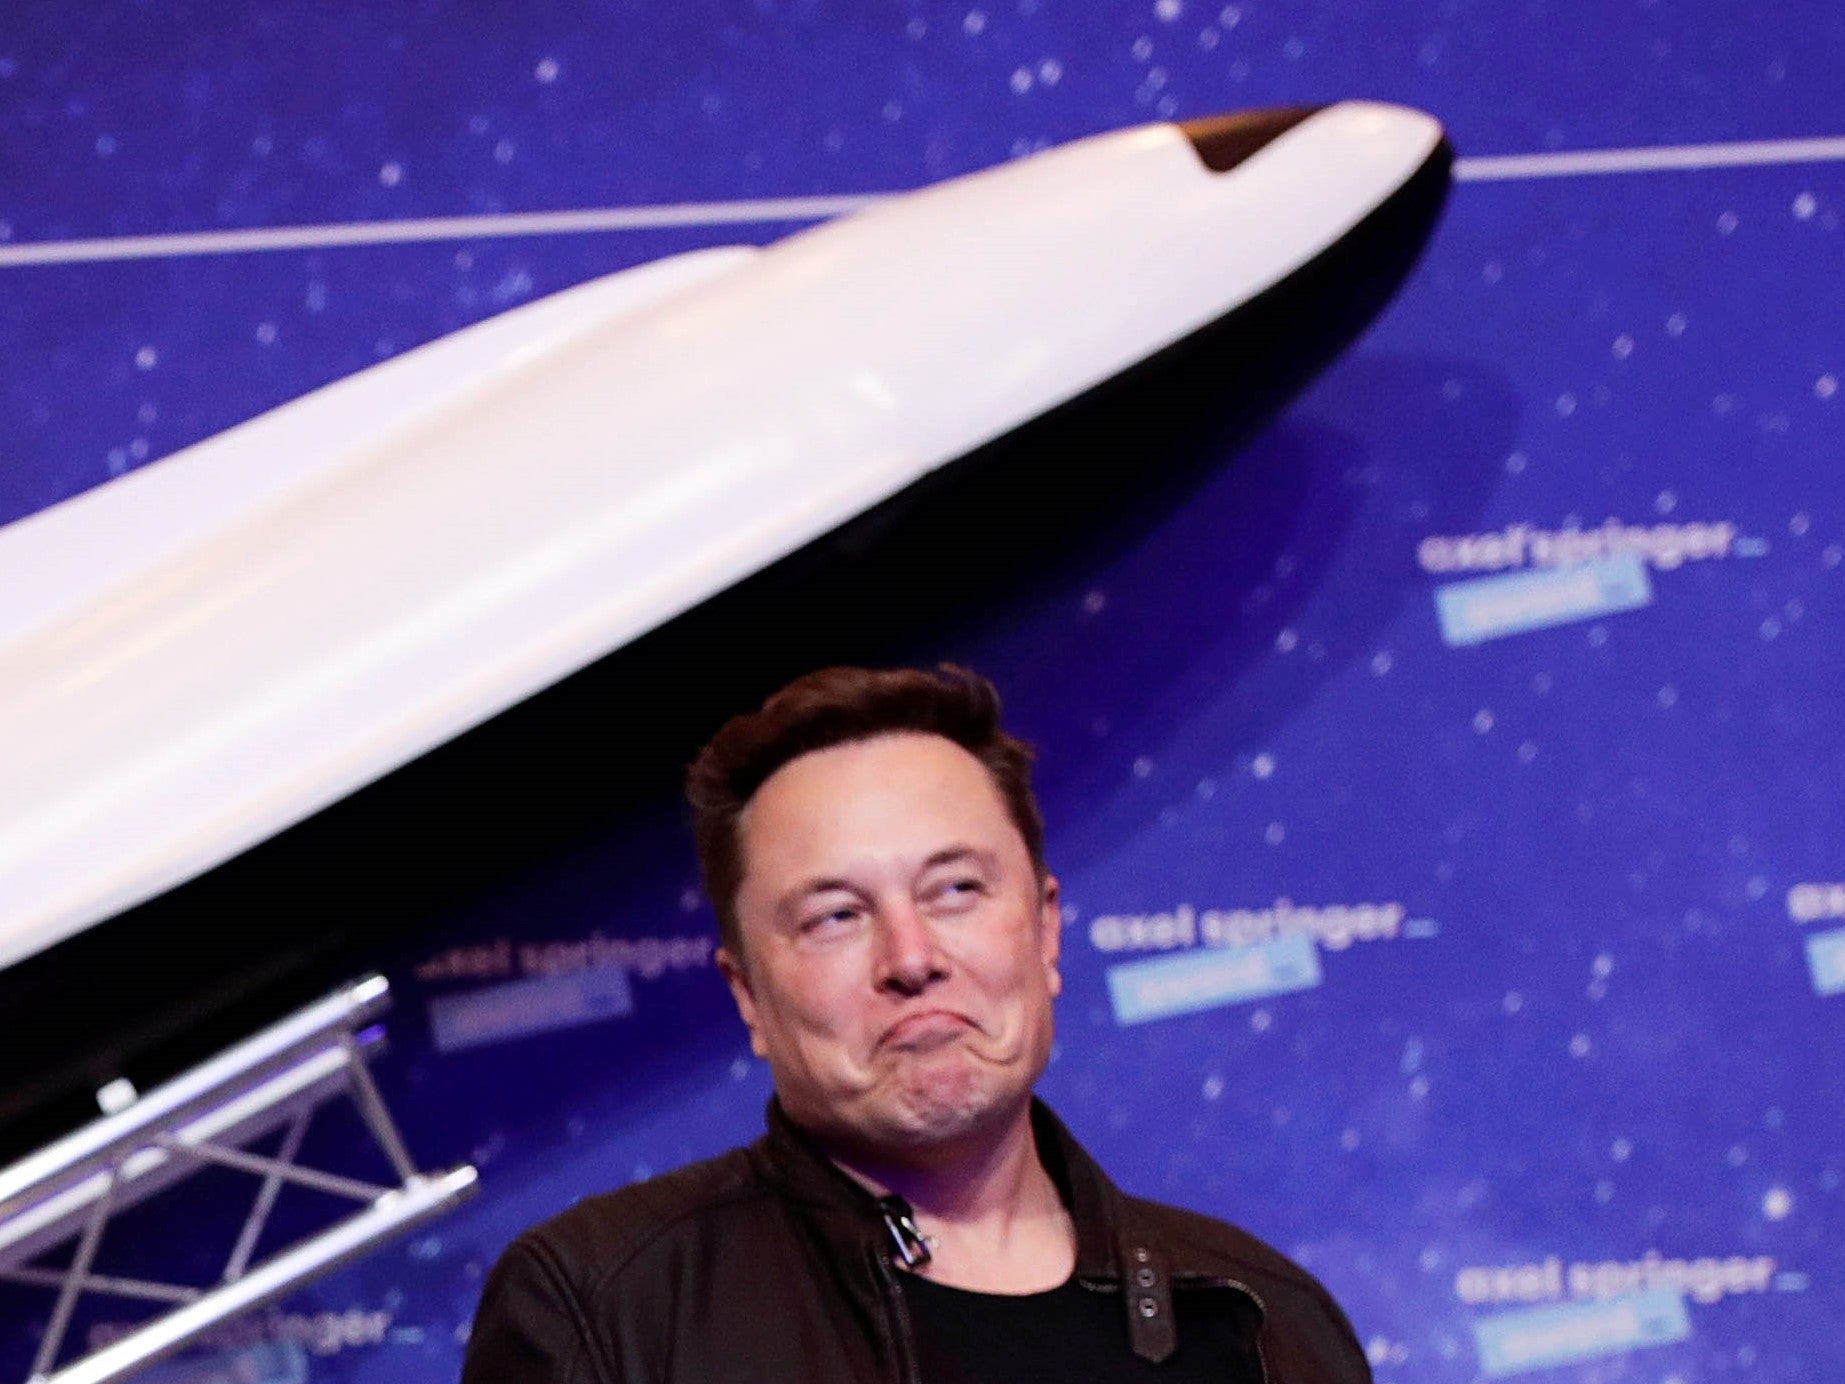 SpaceX owner and Tesla CEO Elon Musk arrives on the red carpet for the Axel Springer Award on 1 December, 2020 in Berlin, Germany